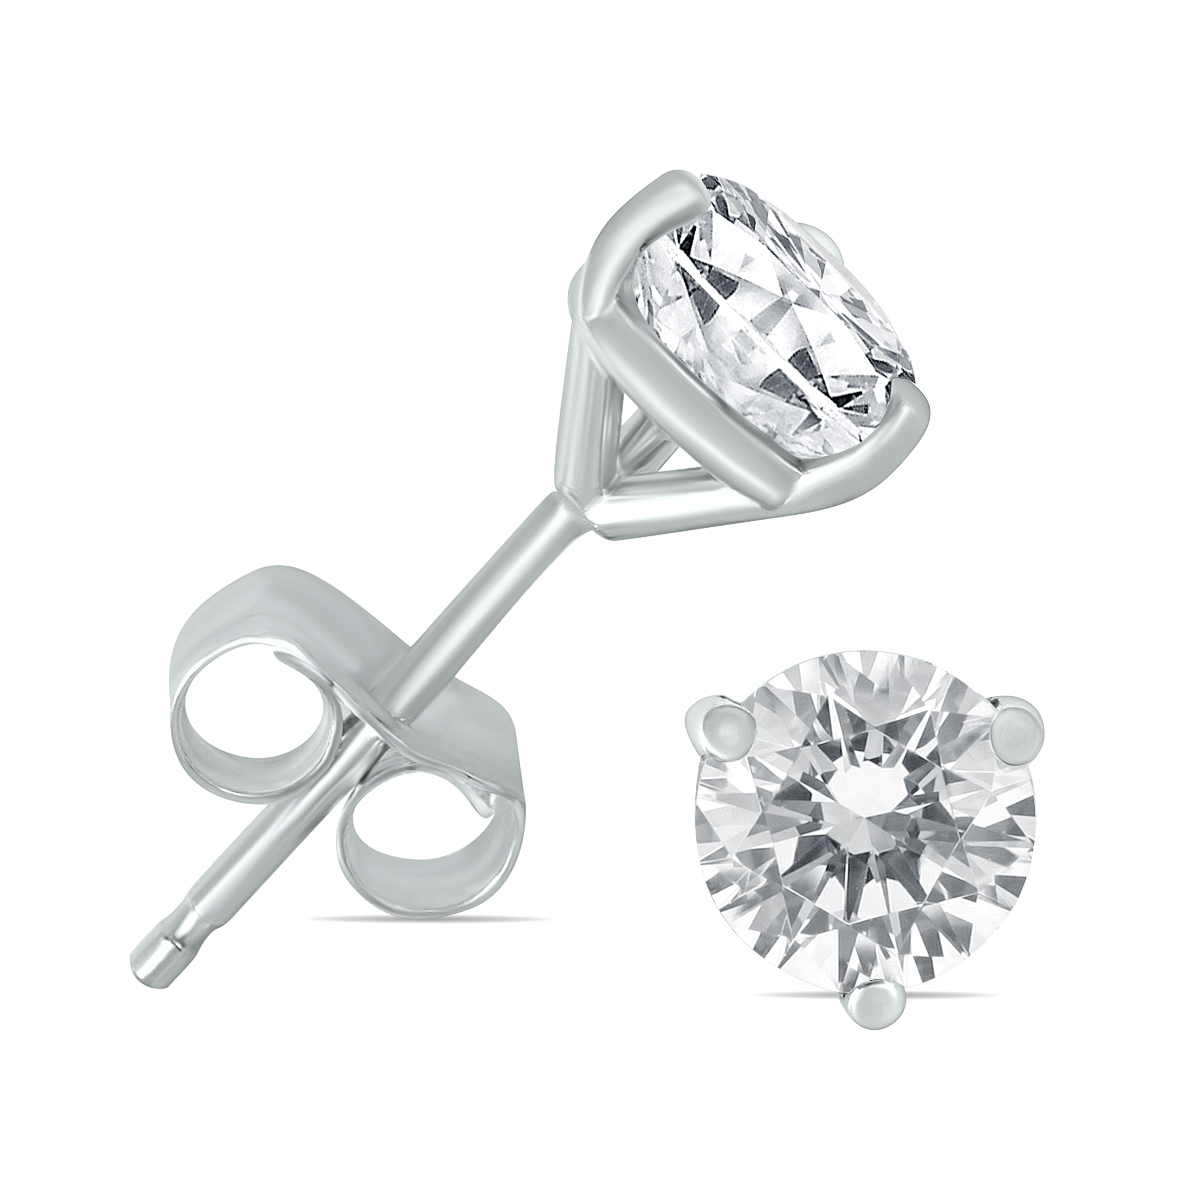 1/4 Carat TW AGS Certified Martini Set Round Diamond Solitaire Earrings in 14K White Gold